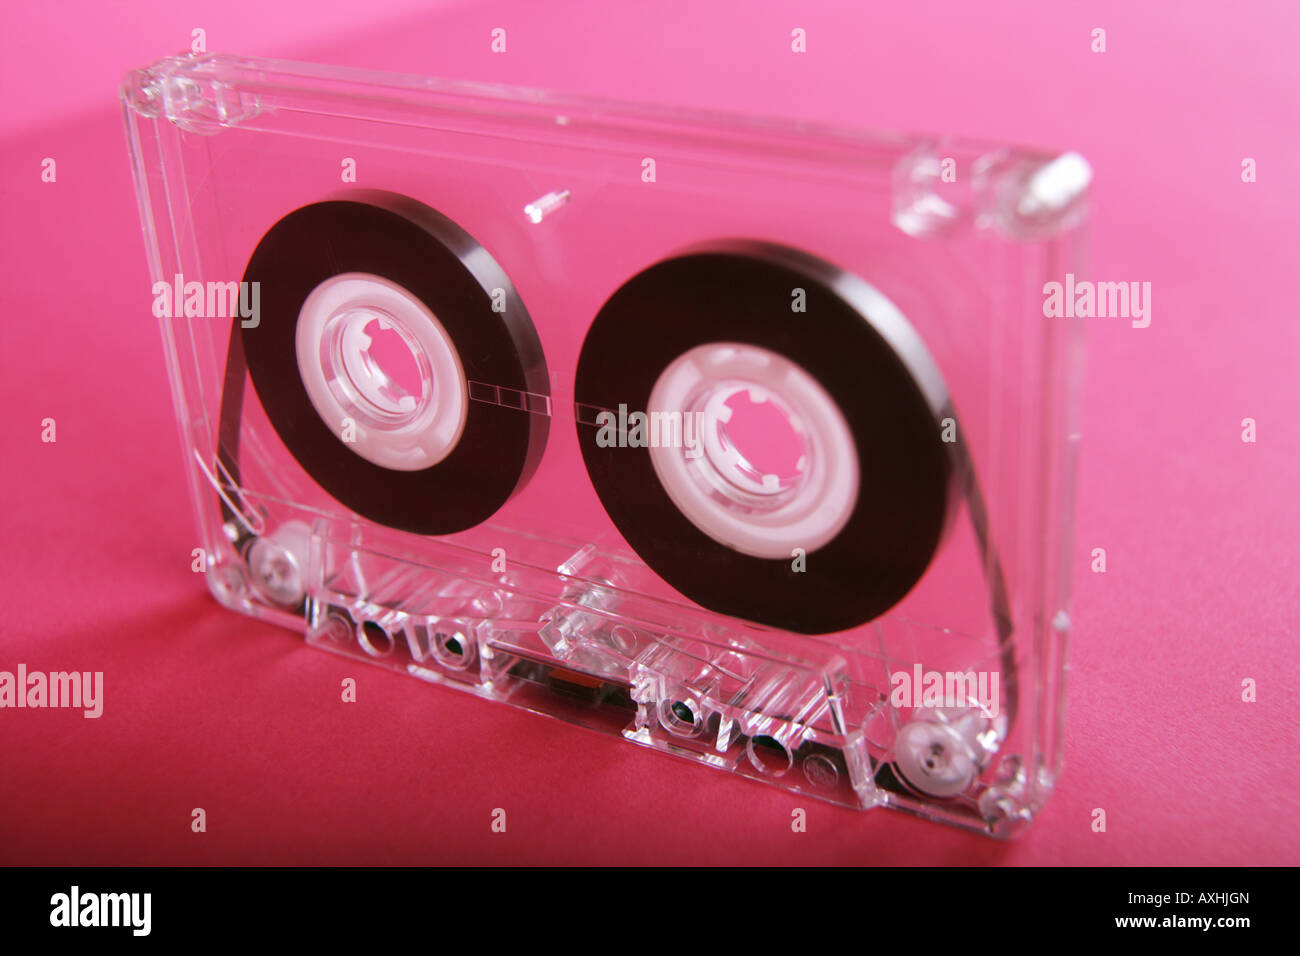 Transparent Audio Cassette tape on a pink background. Stock Photo